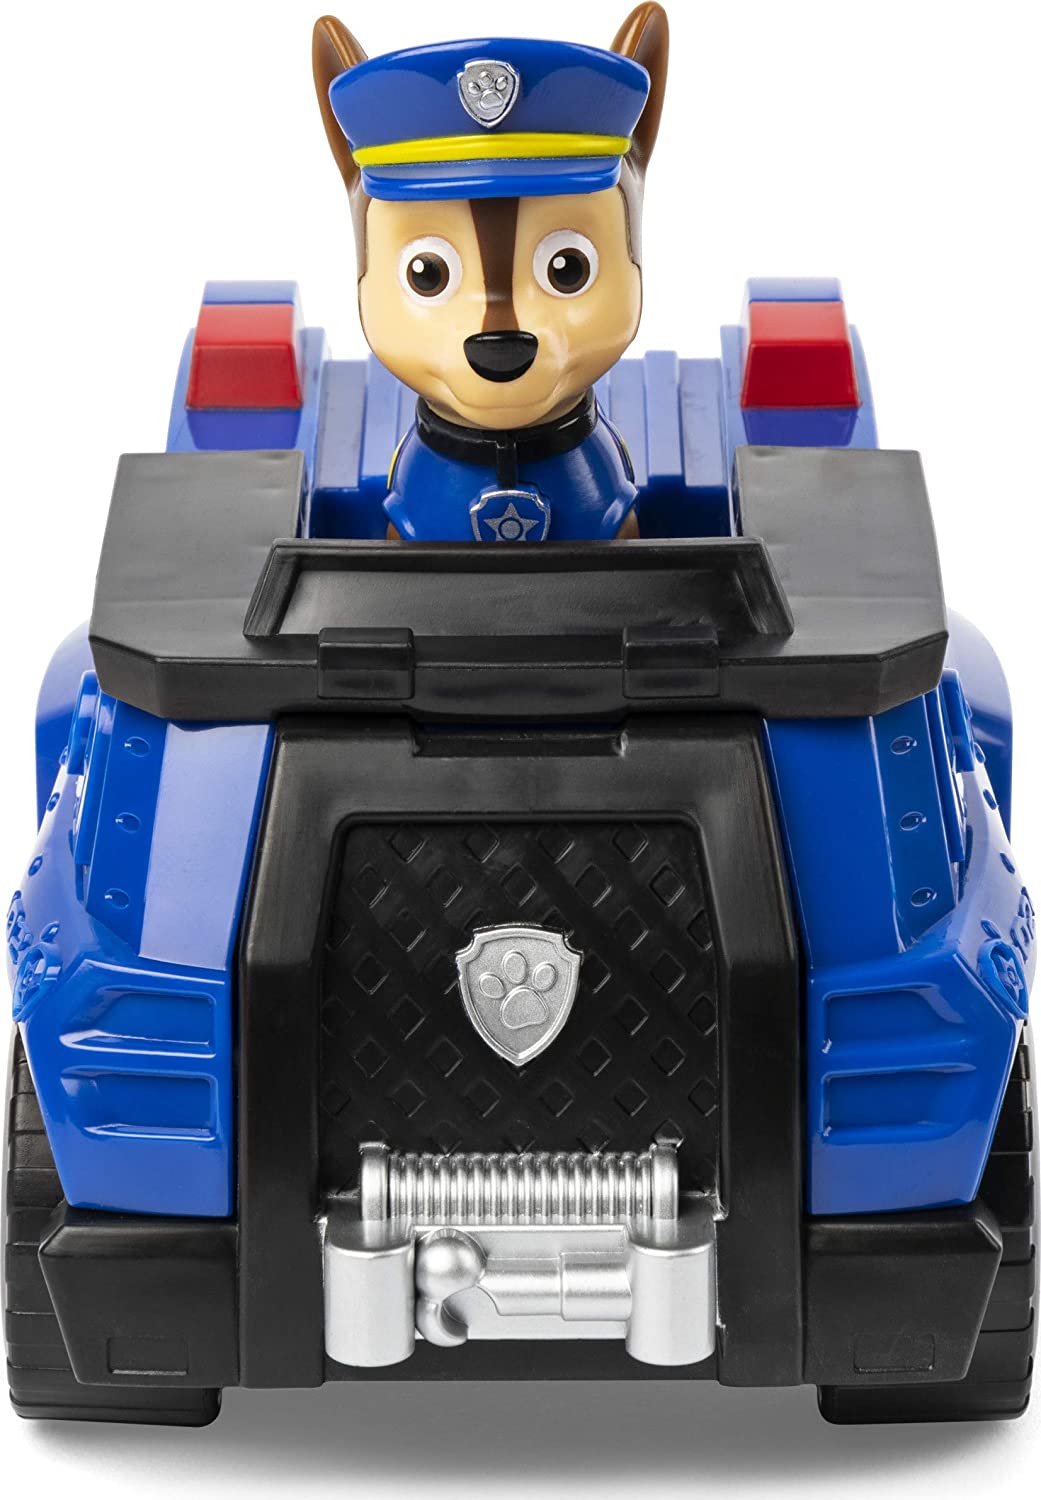 PAW Patrol 6054118 Chase’s Patrol Cruiser Vehicle with Collectible Figure